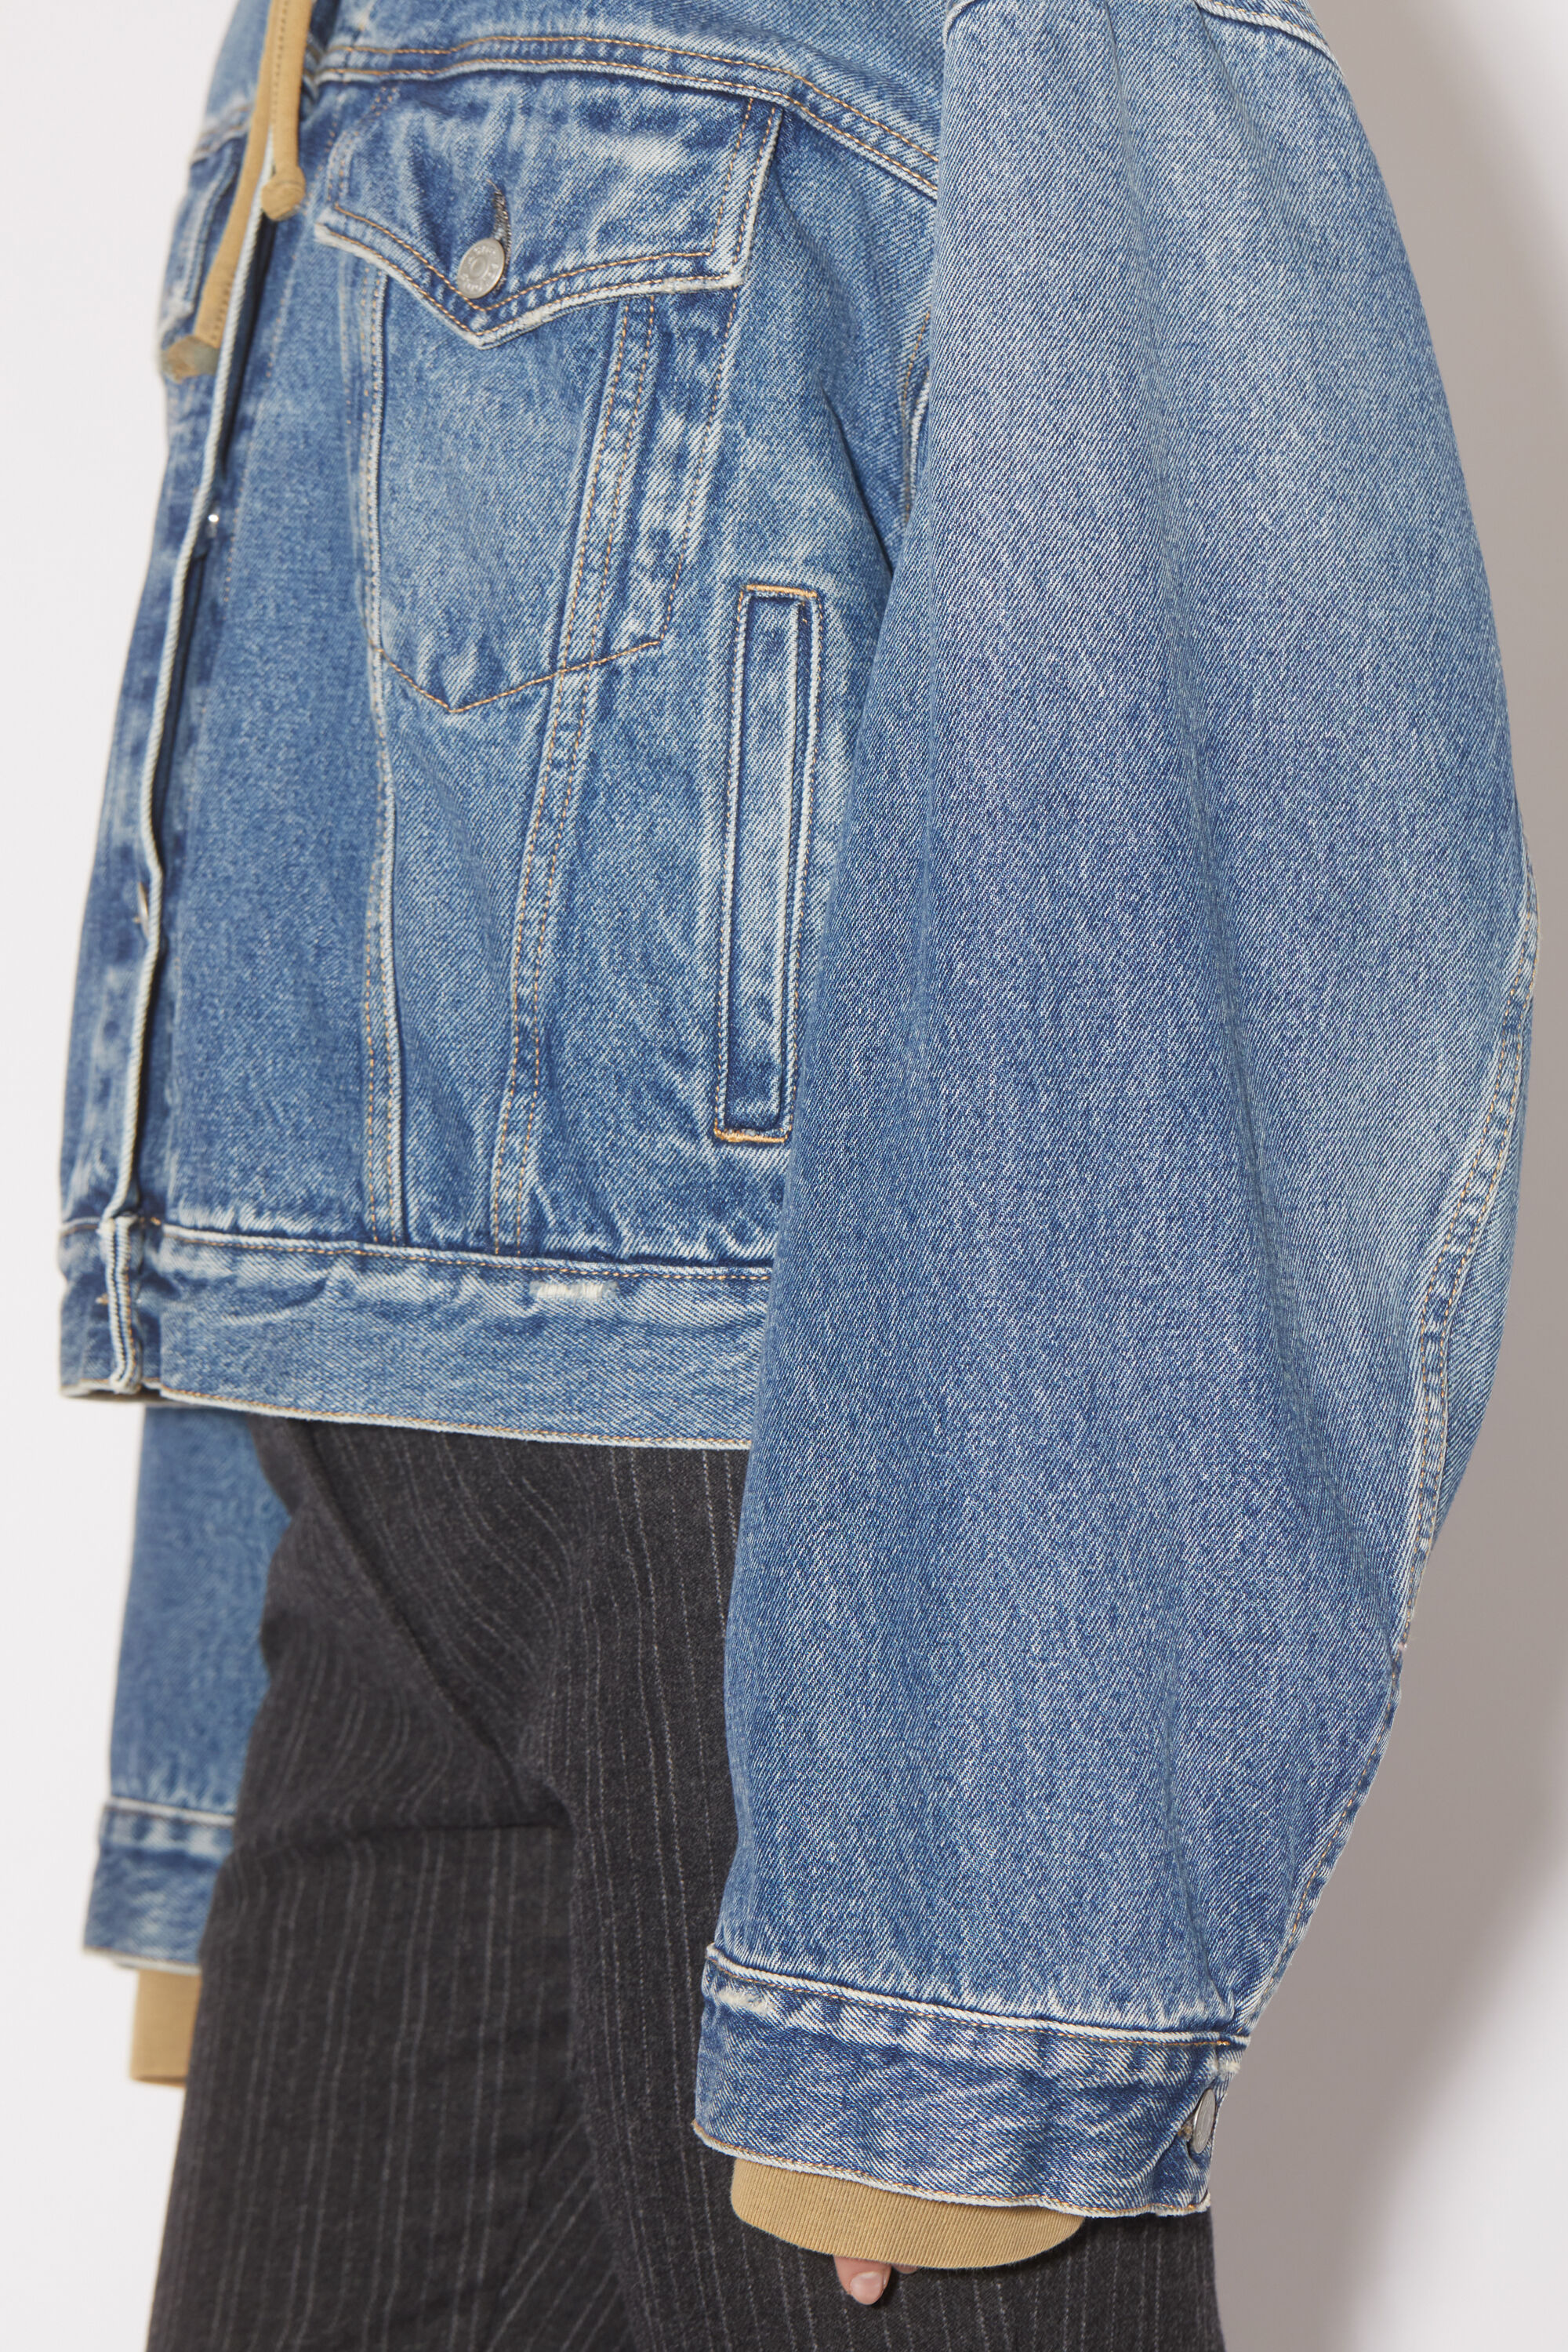 Denim jacket - Relaxed cropped fit